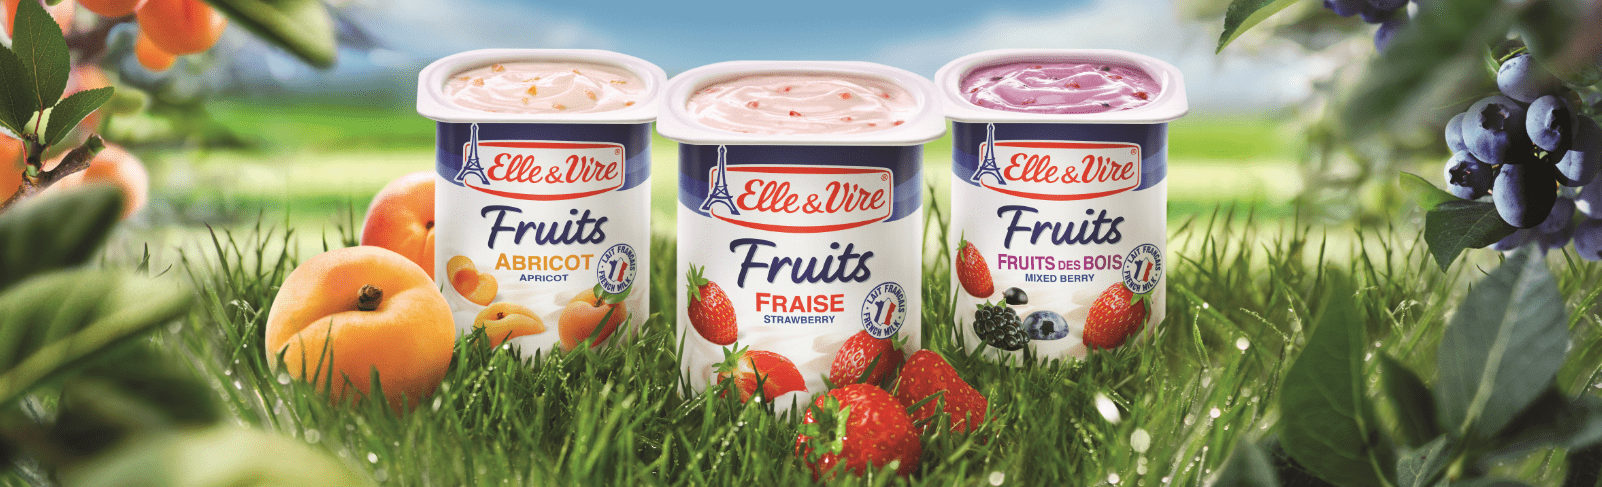 The Fruits dairy desserts have been renewed!